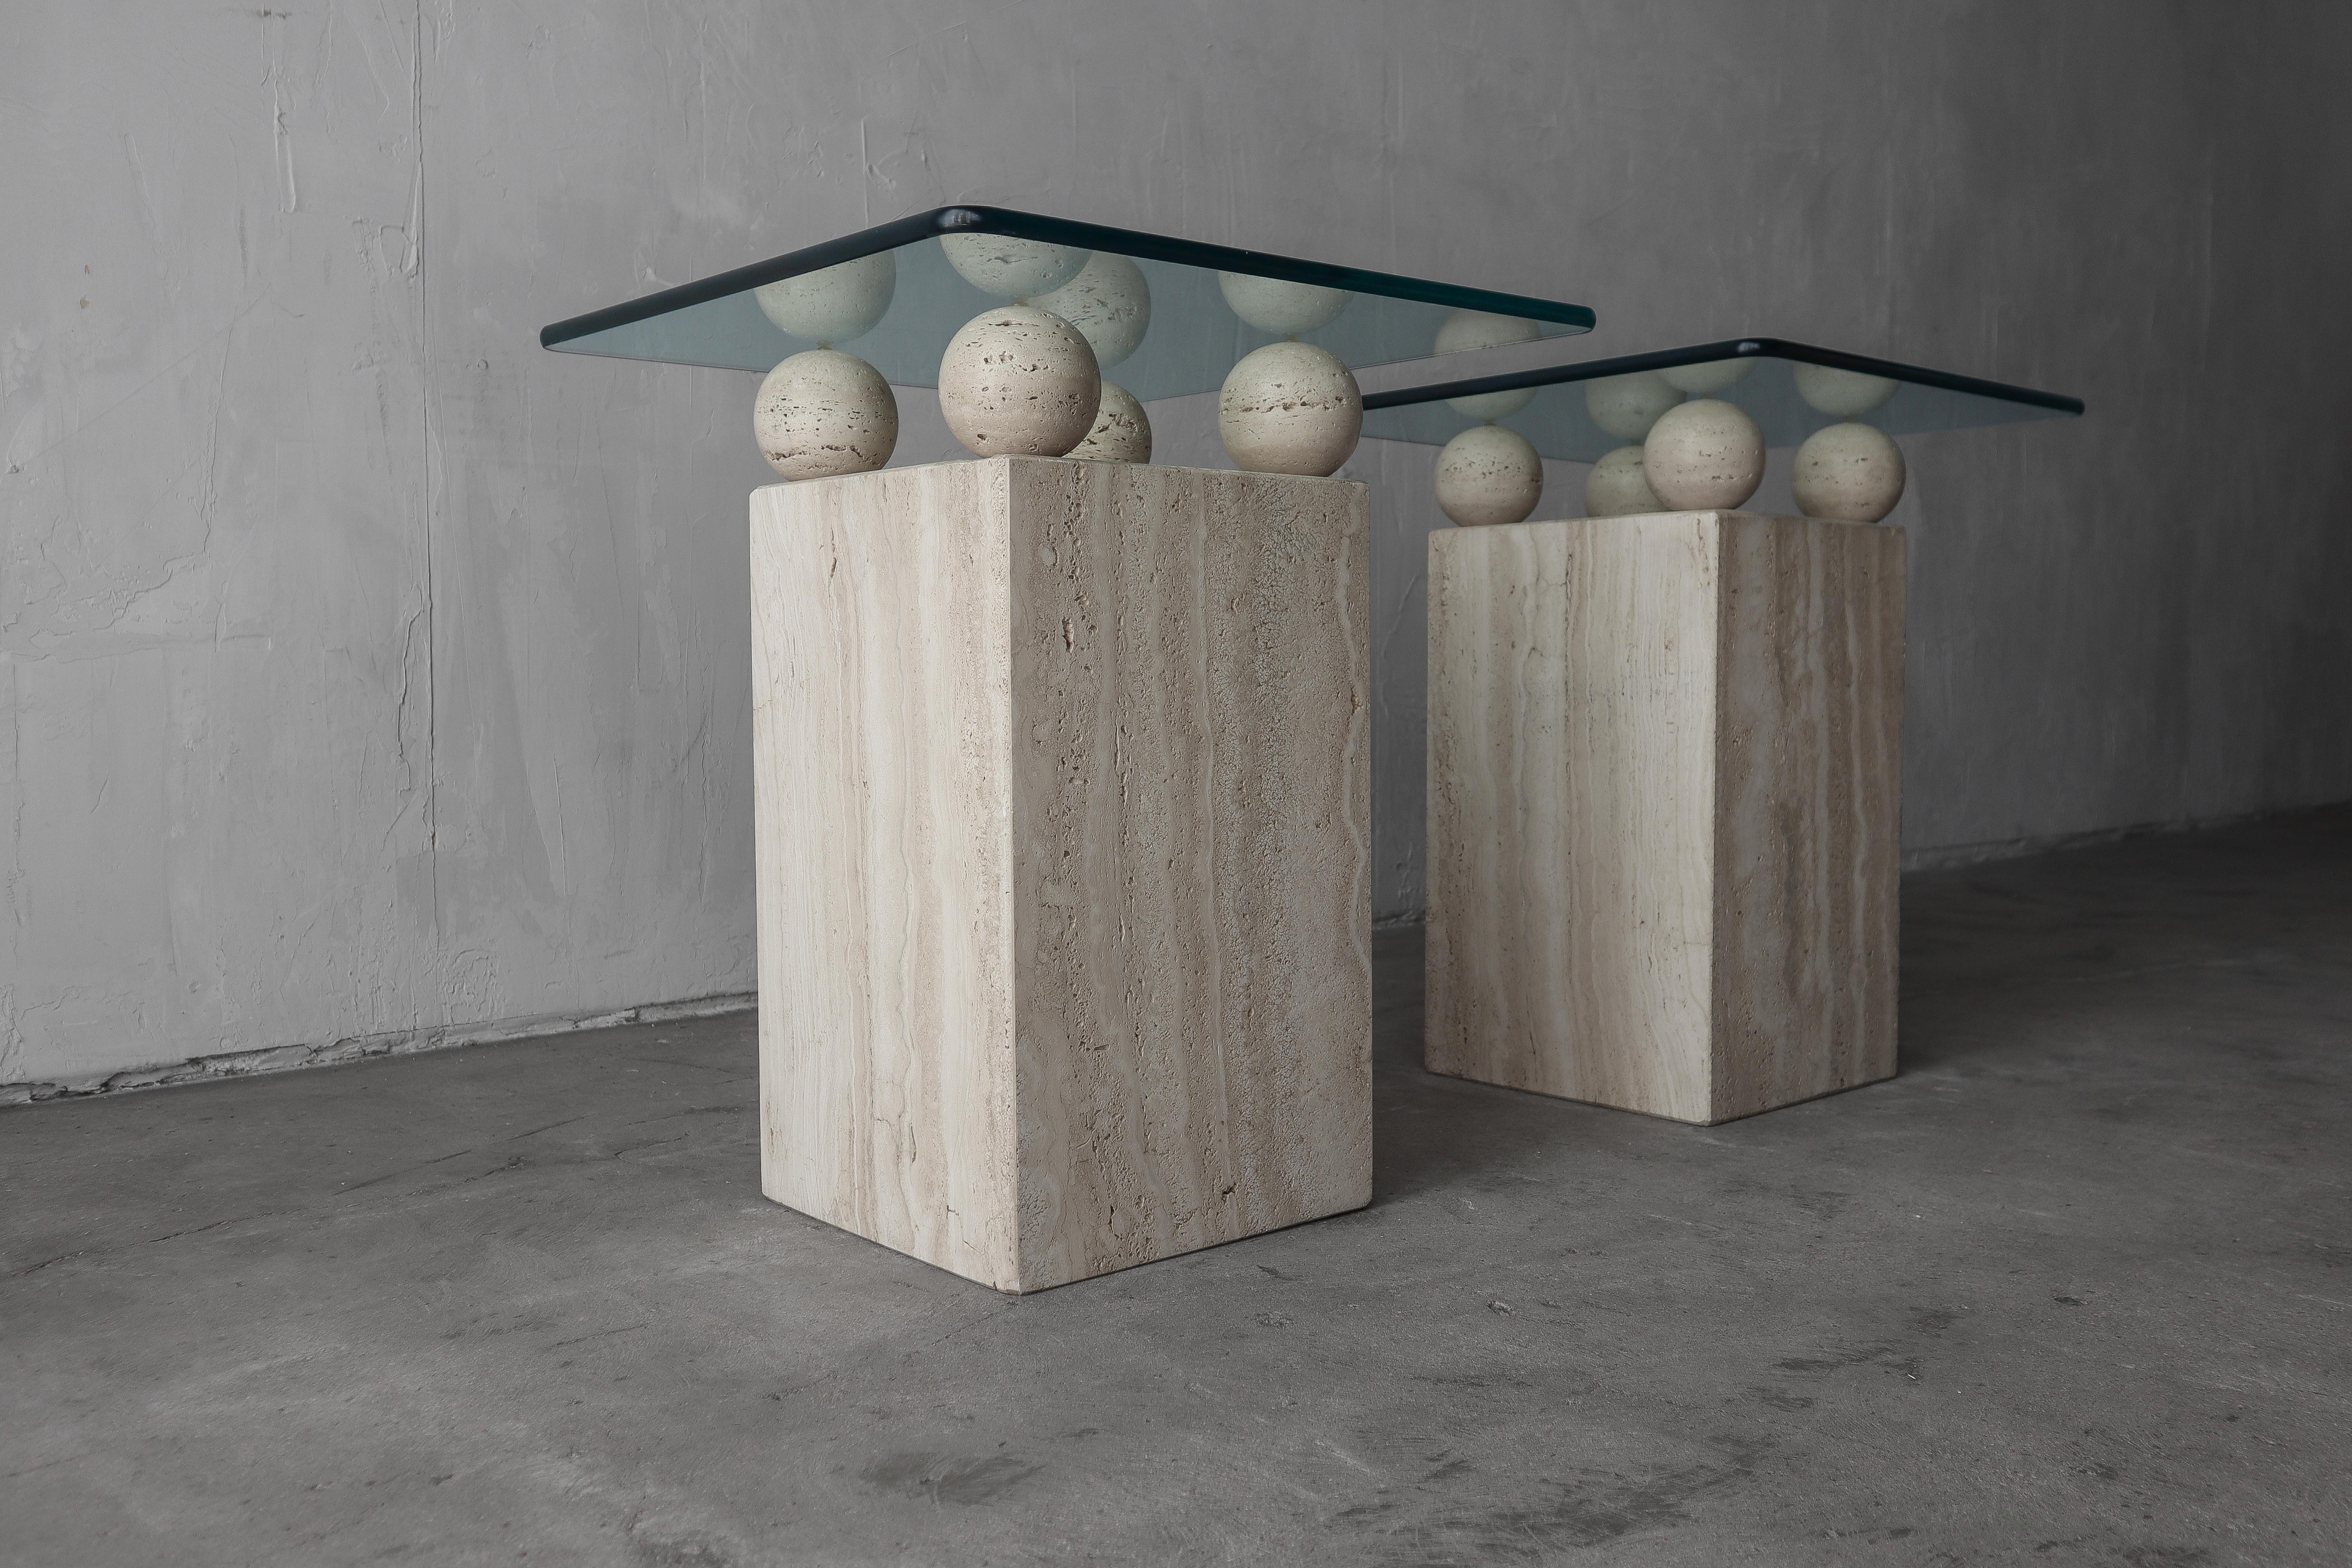 Super rare pair of square travertine side table with gorgeous glass tops supported by unique solid travertine balls. Seen a lot of travertine tables but never a pair like this.

Bases measure 11